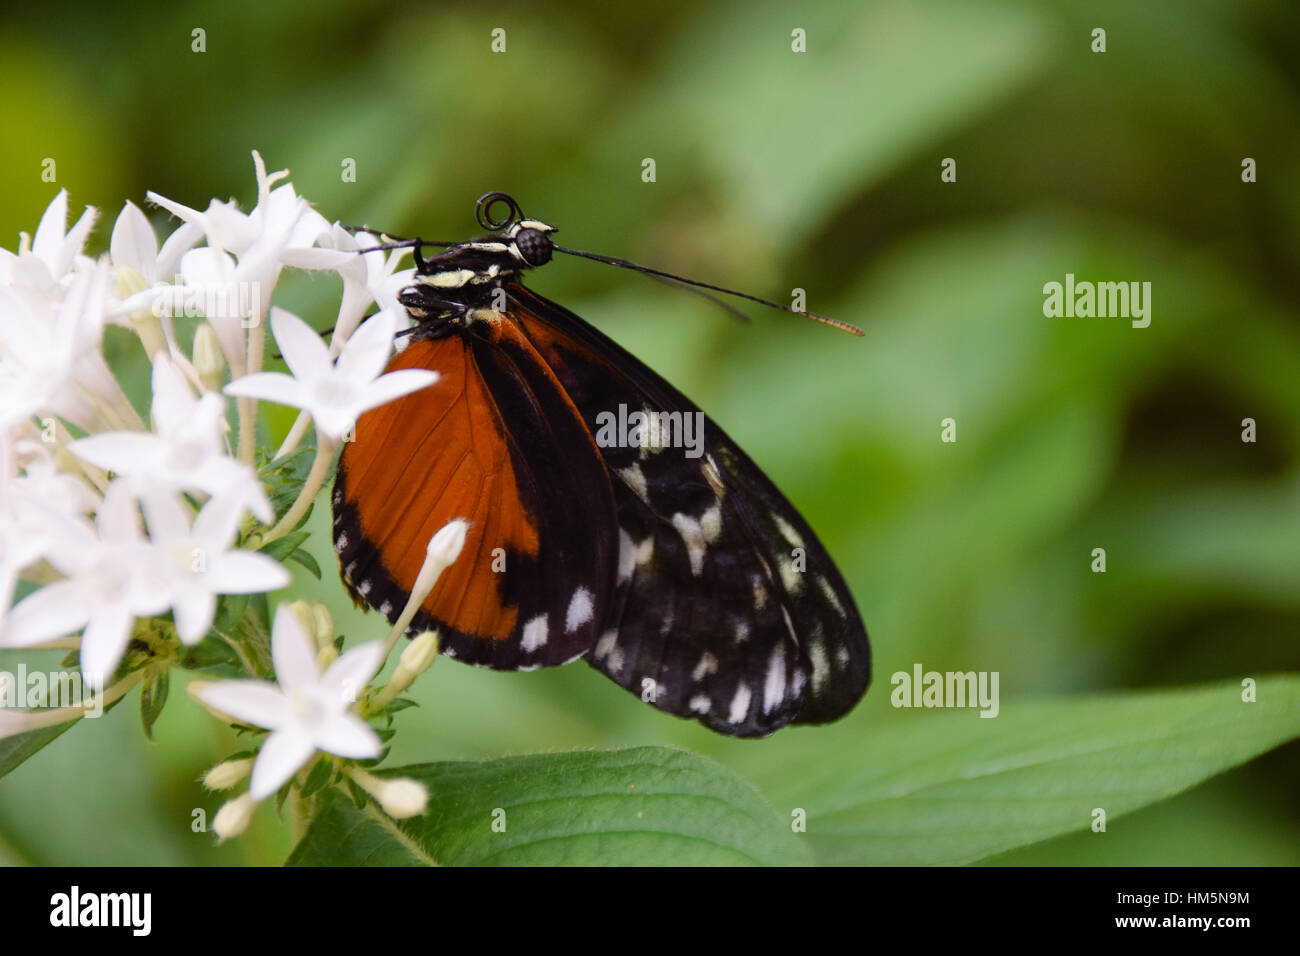 Tiger Longwing butterfly (Heliconius hecale) on a white flower in Guanacaste region of Costa Rica Stock Photo